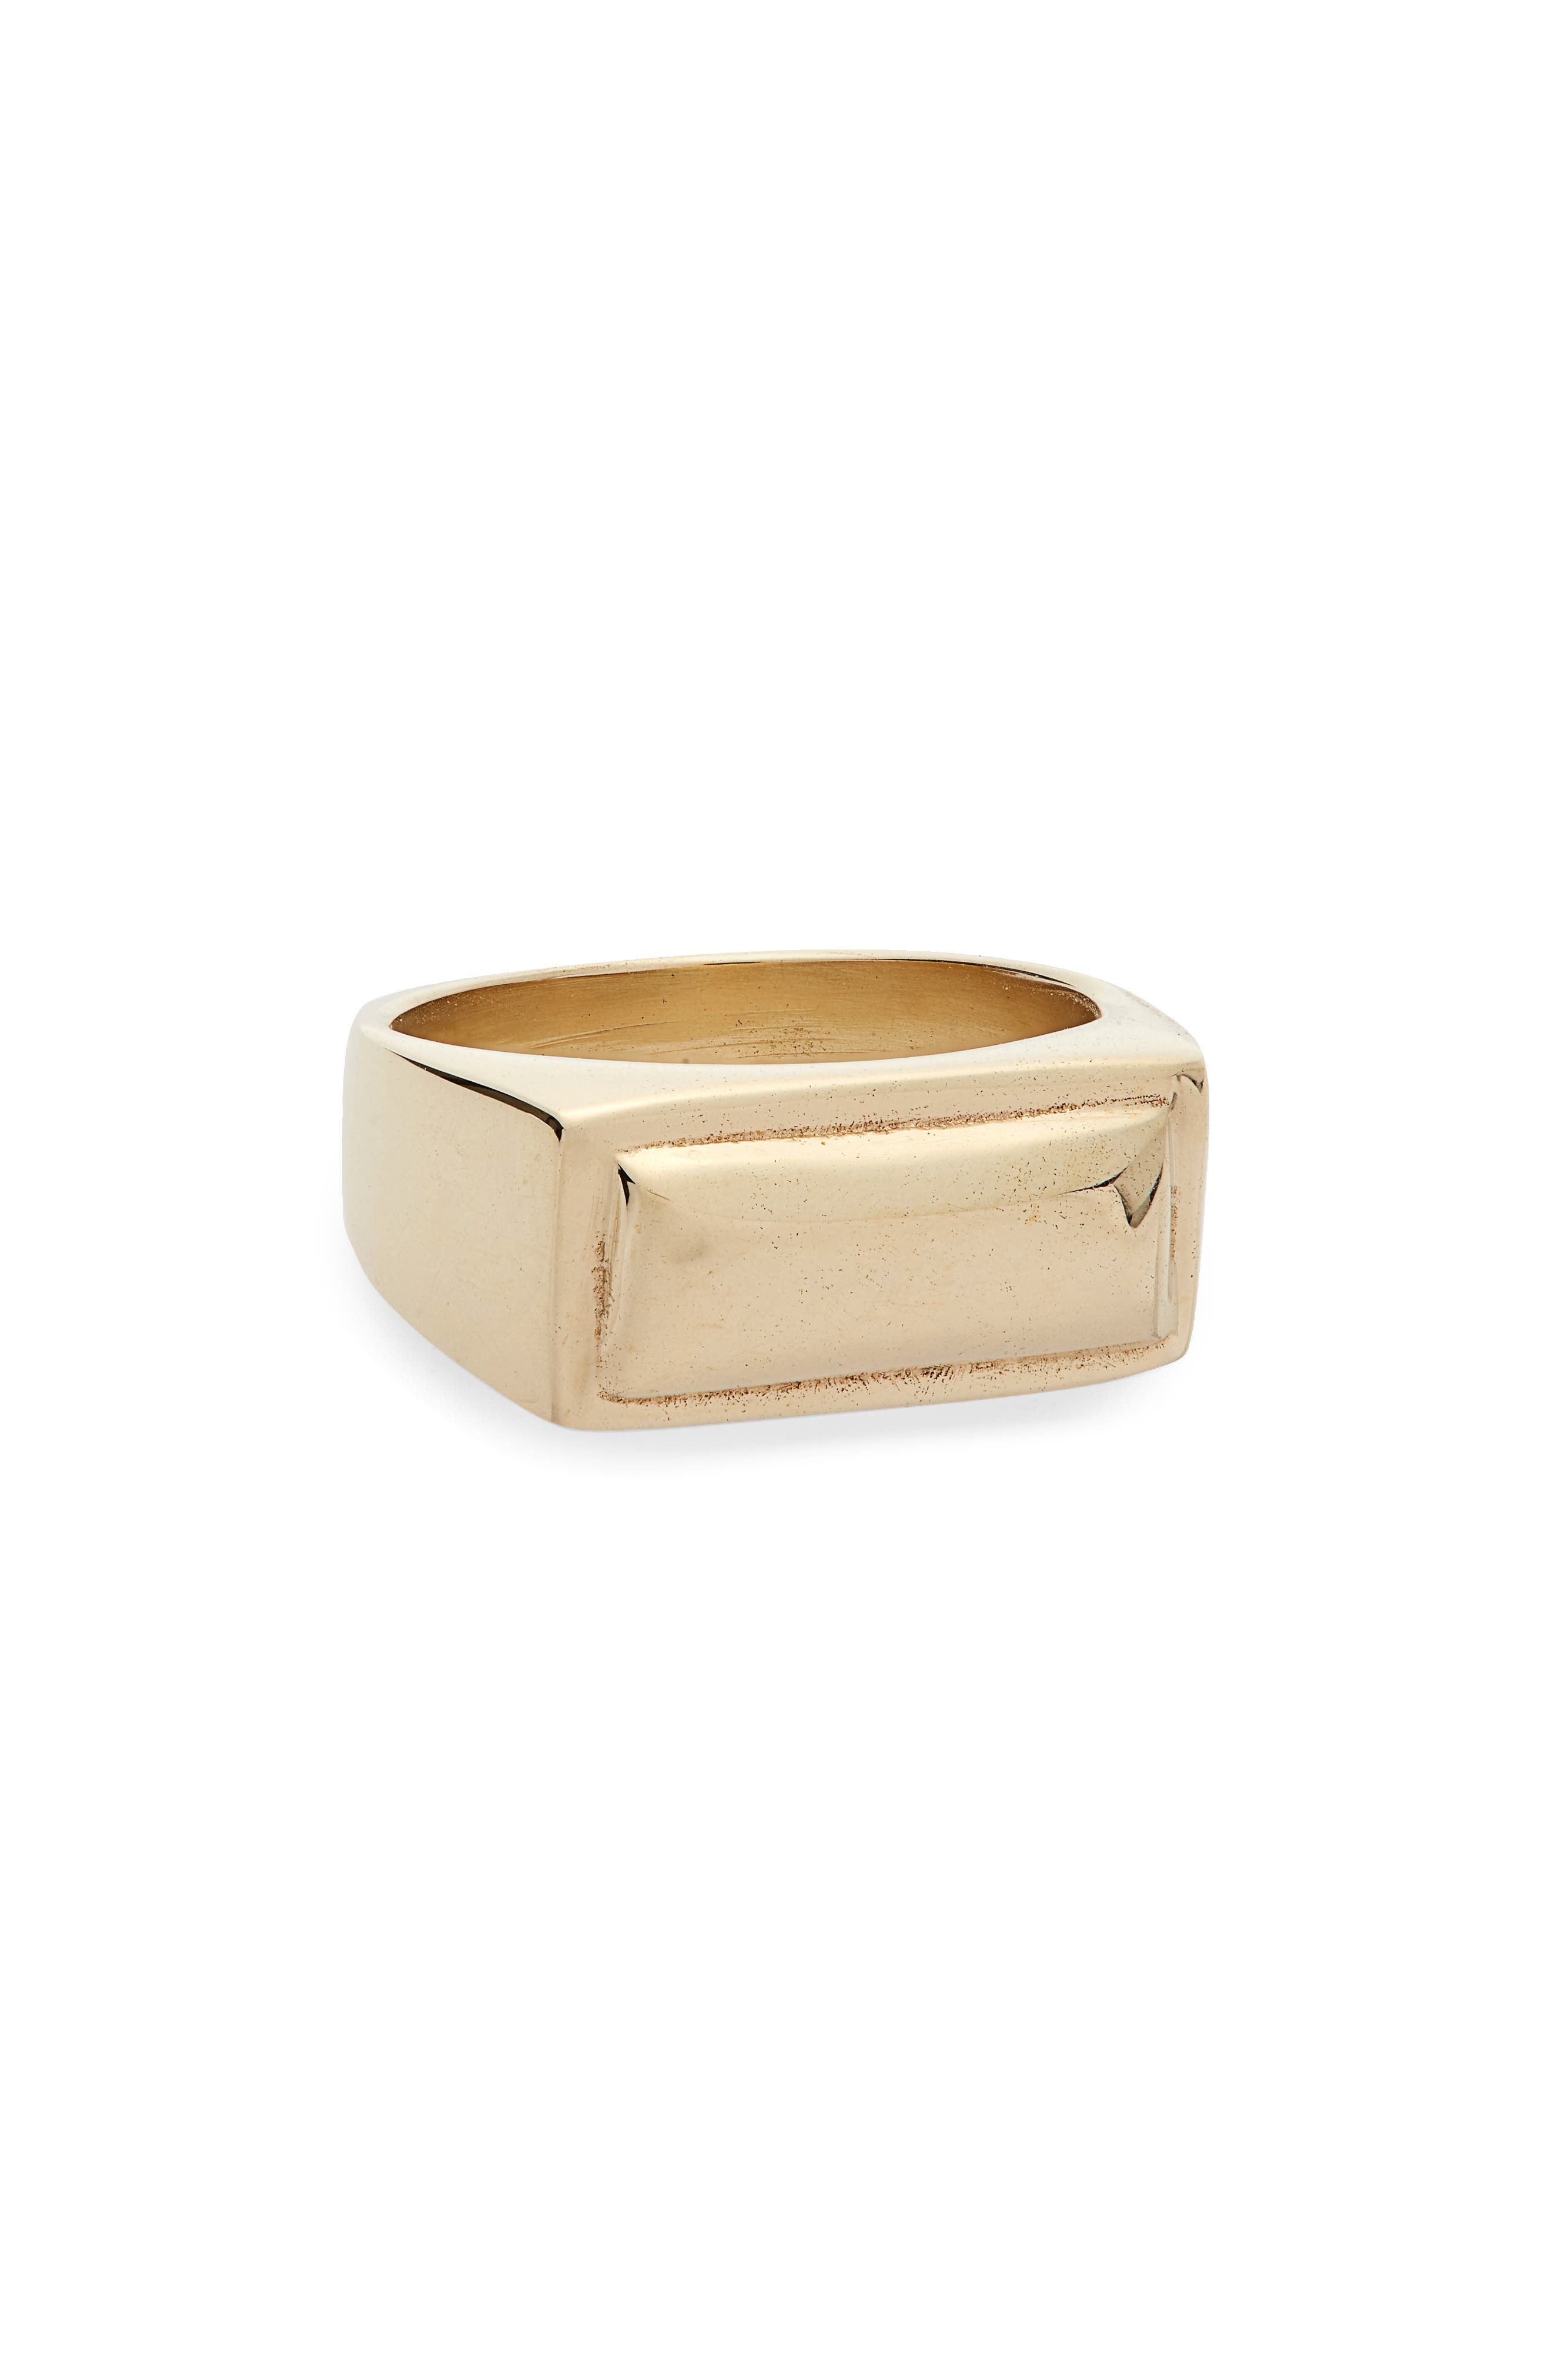 Laura Lombardi Nonno Ring in Brass at Nordstrom, Size 7 Us